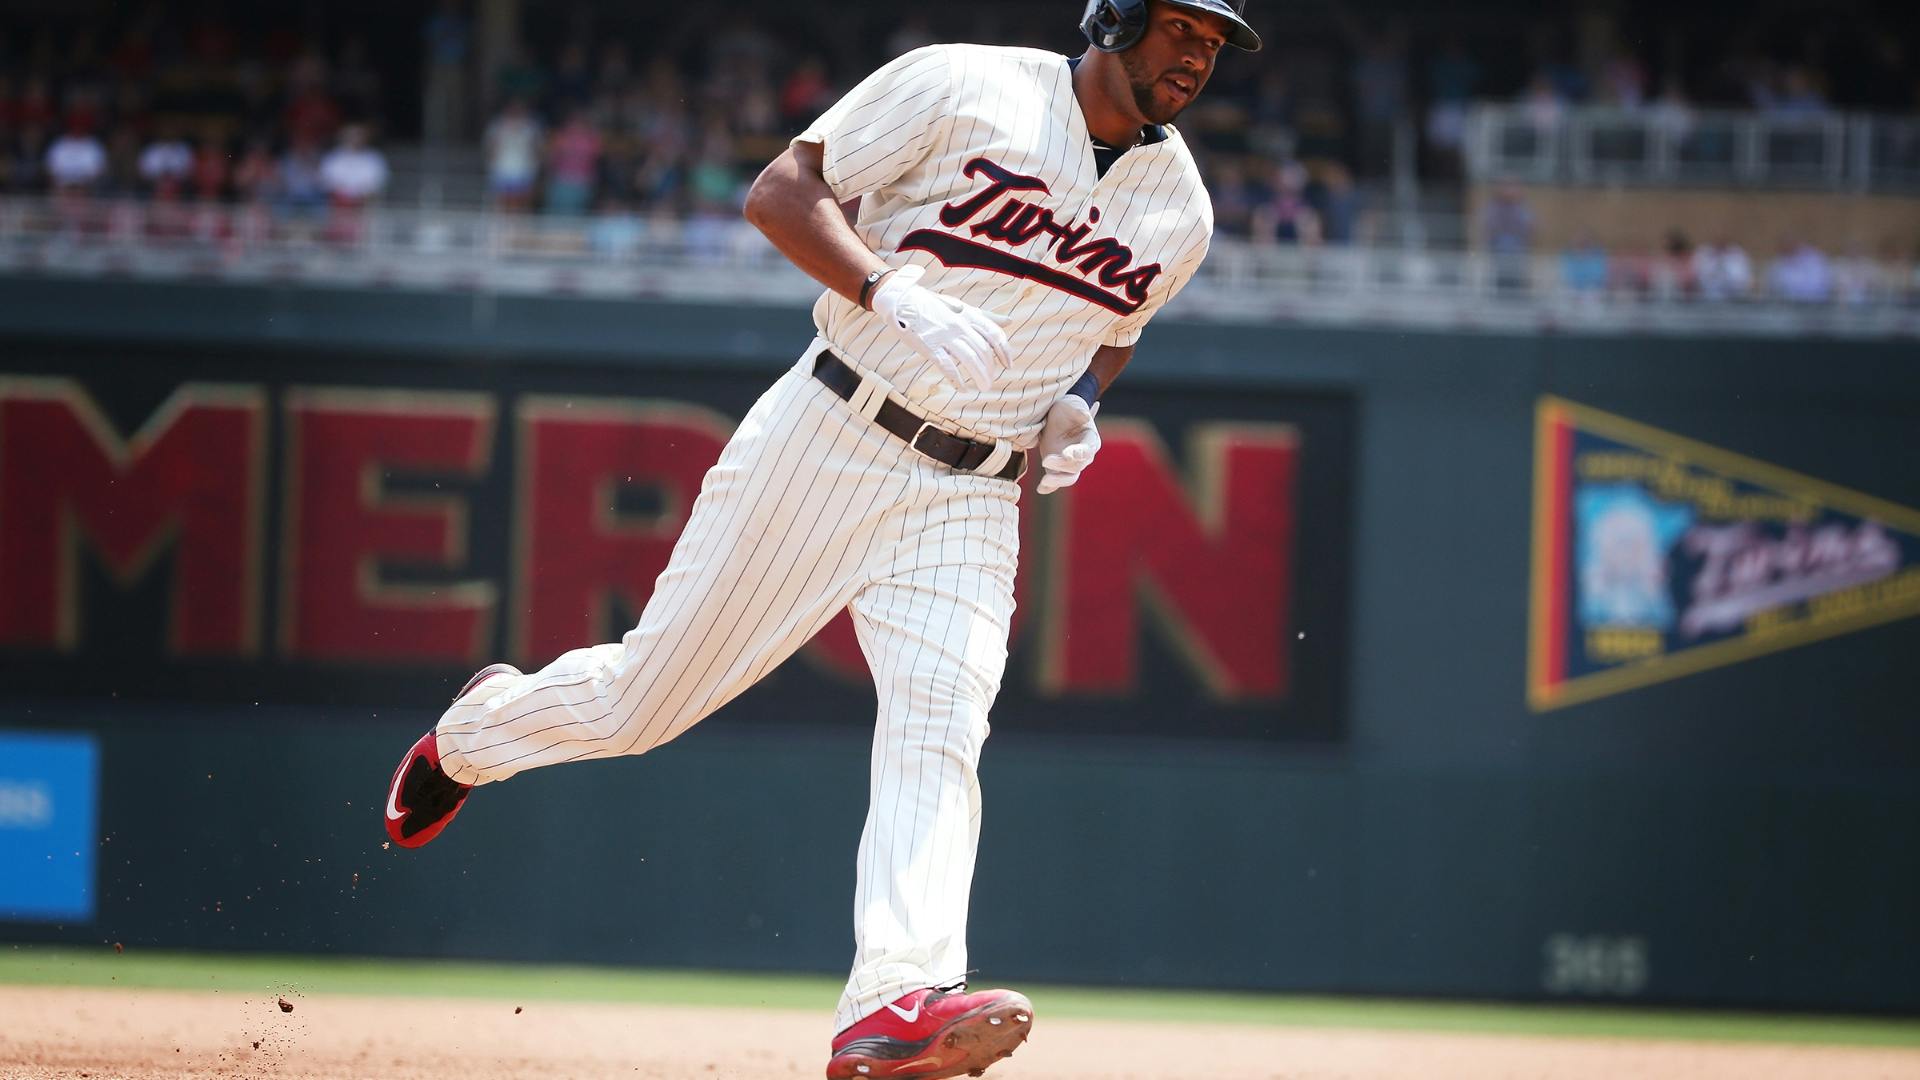 Aaron Hicks' two-run home run was a key hit in the Twins victory Wednesday.